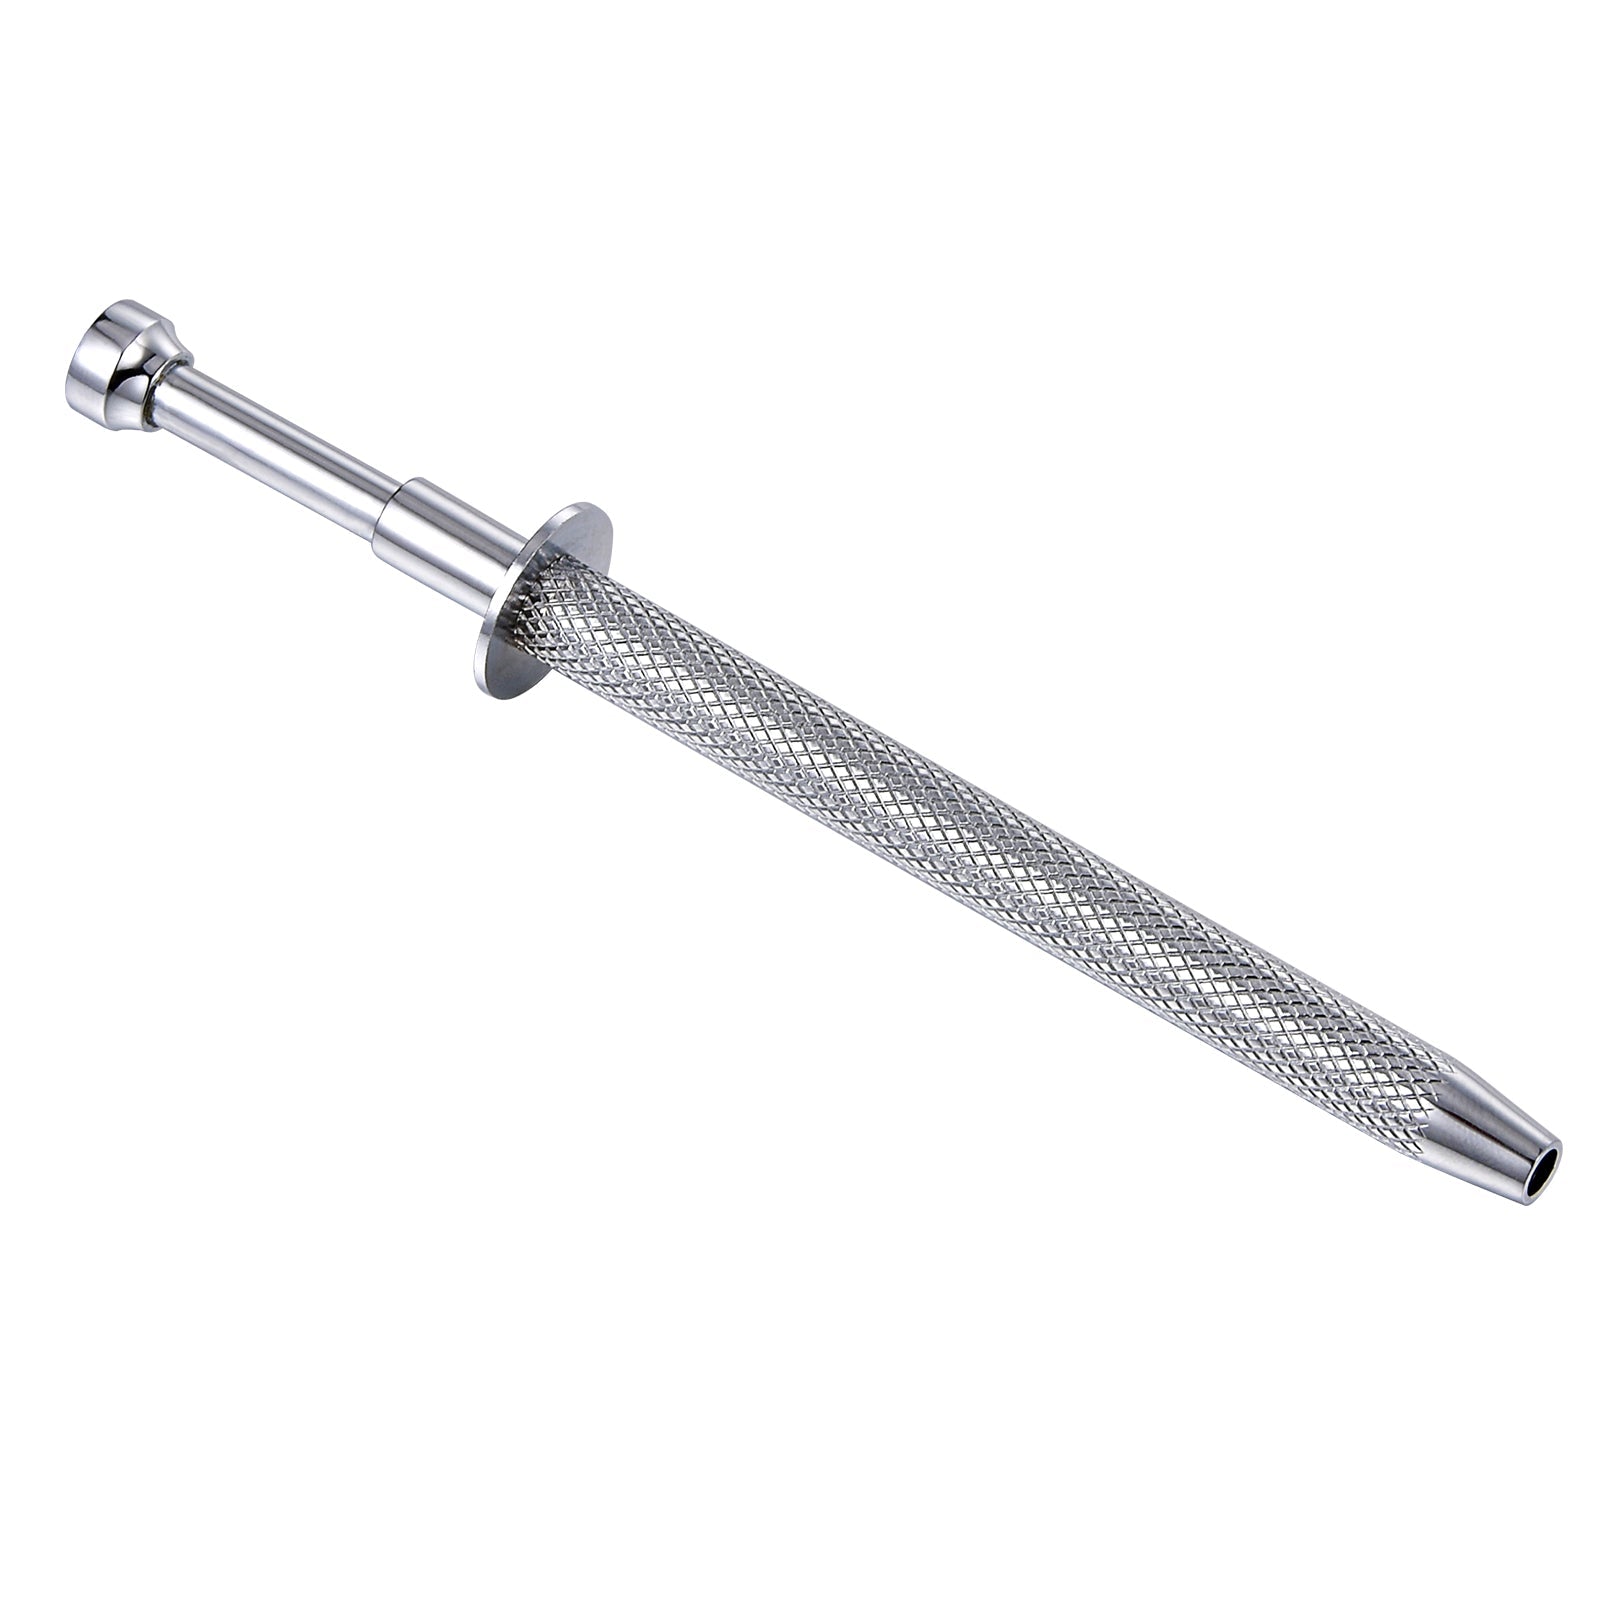 Push-In Syringe Style Quad Prong Small Bead Holder Piercing Tool - Sta